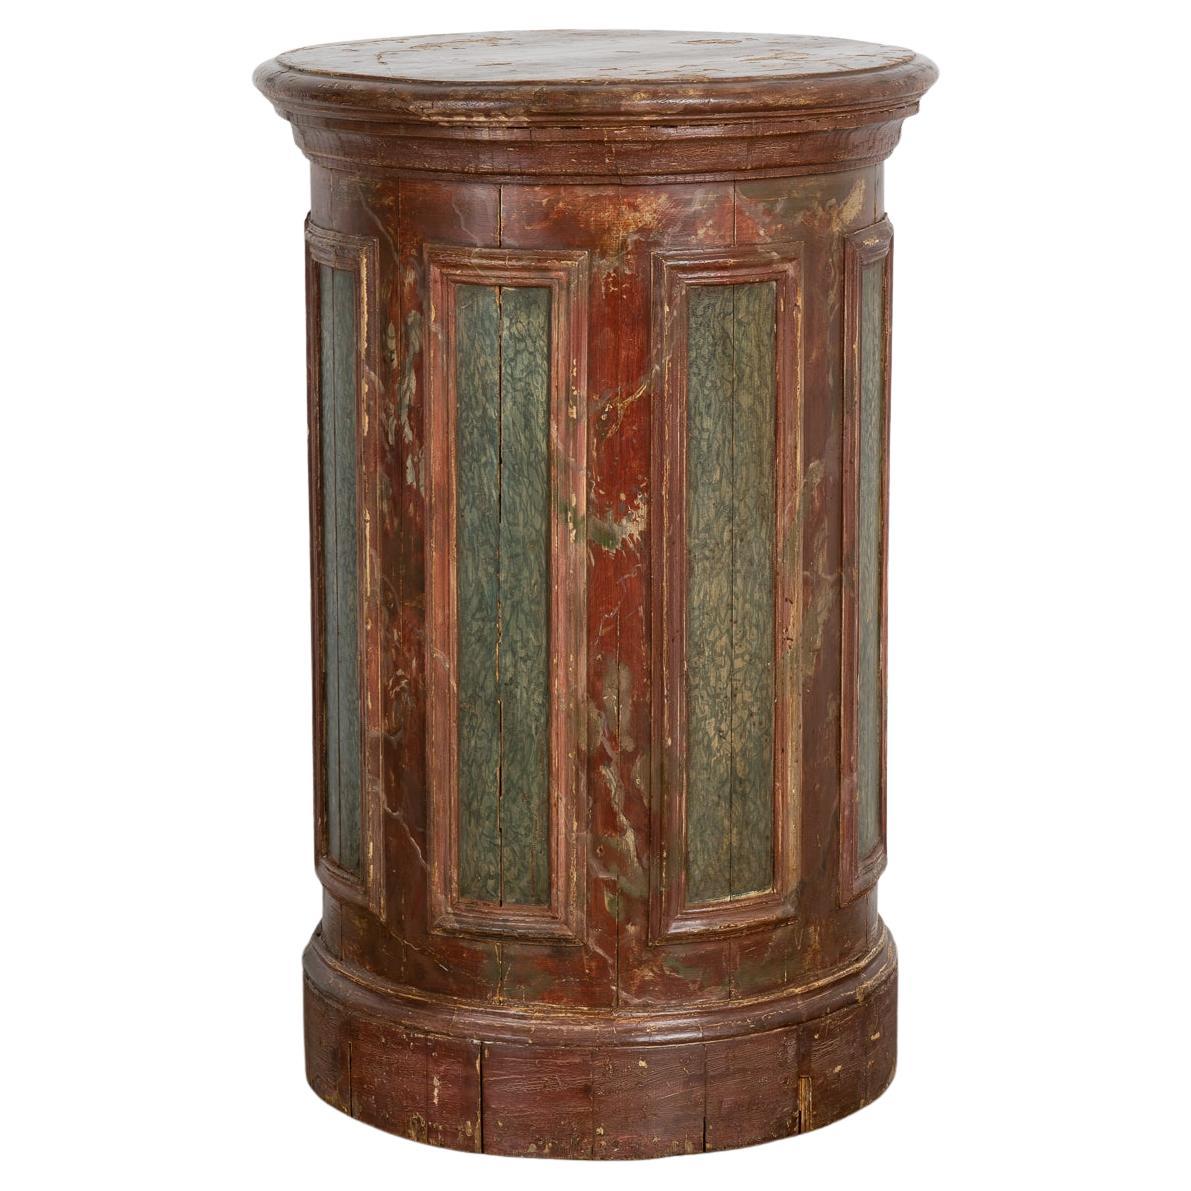 Antique Red Painted Wood Display Pedestal from Sweden, circa 1840-1860